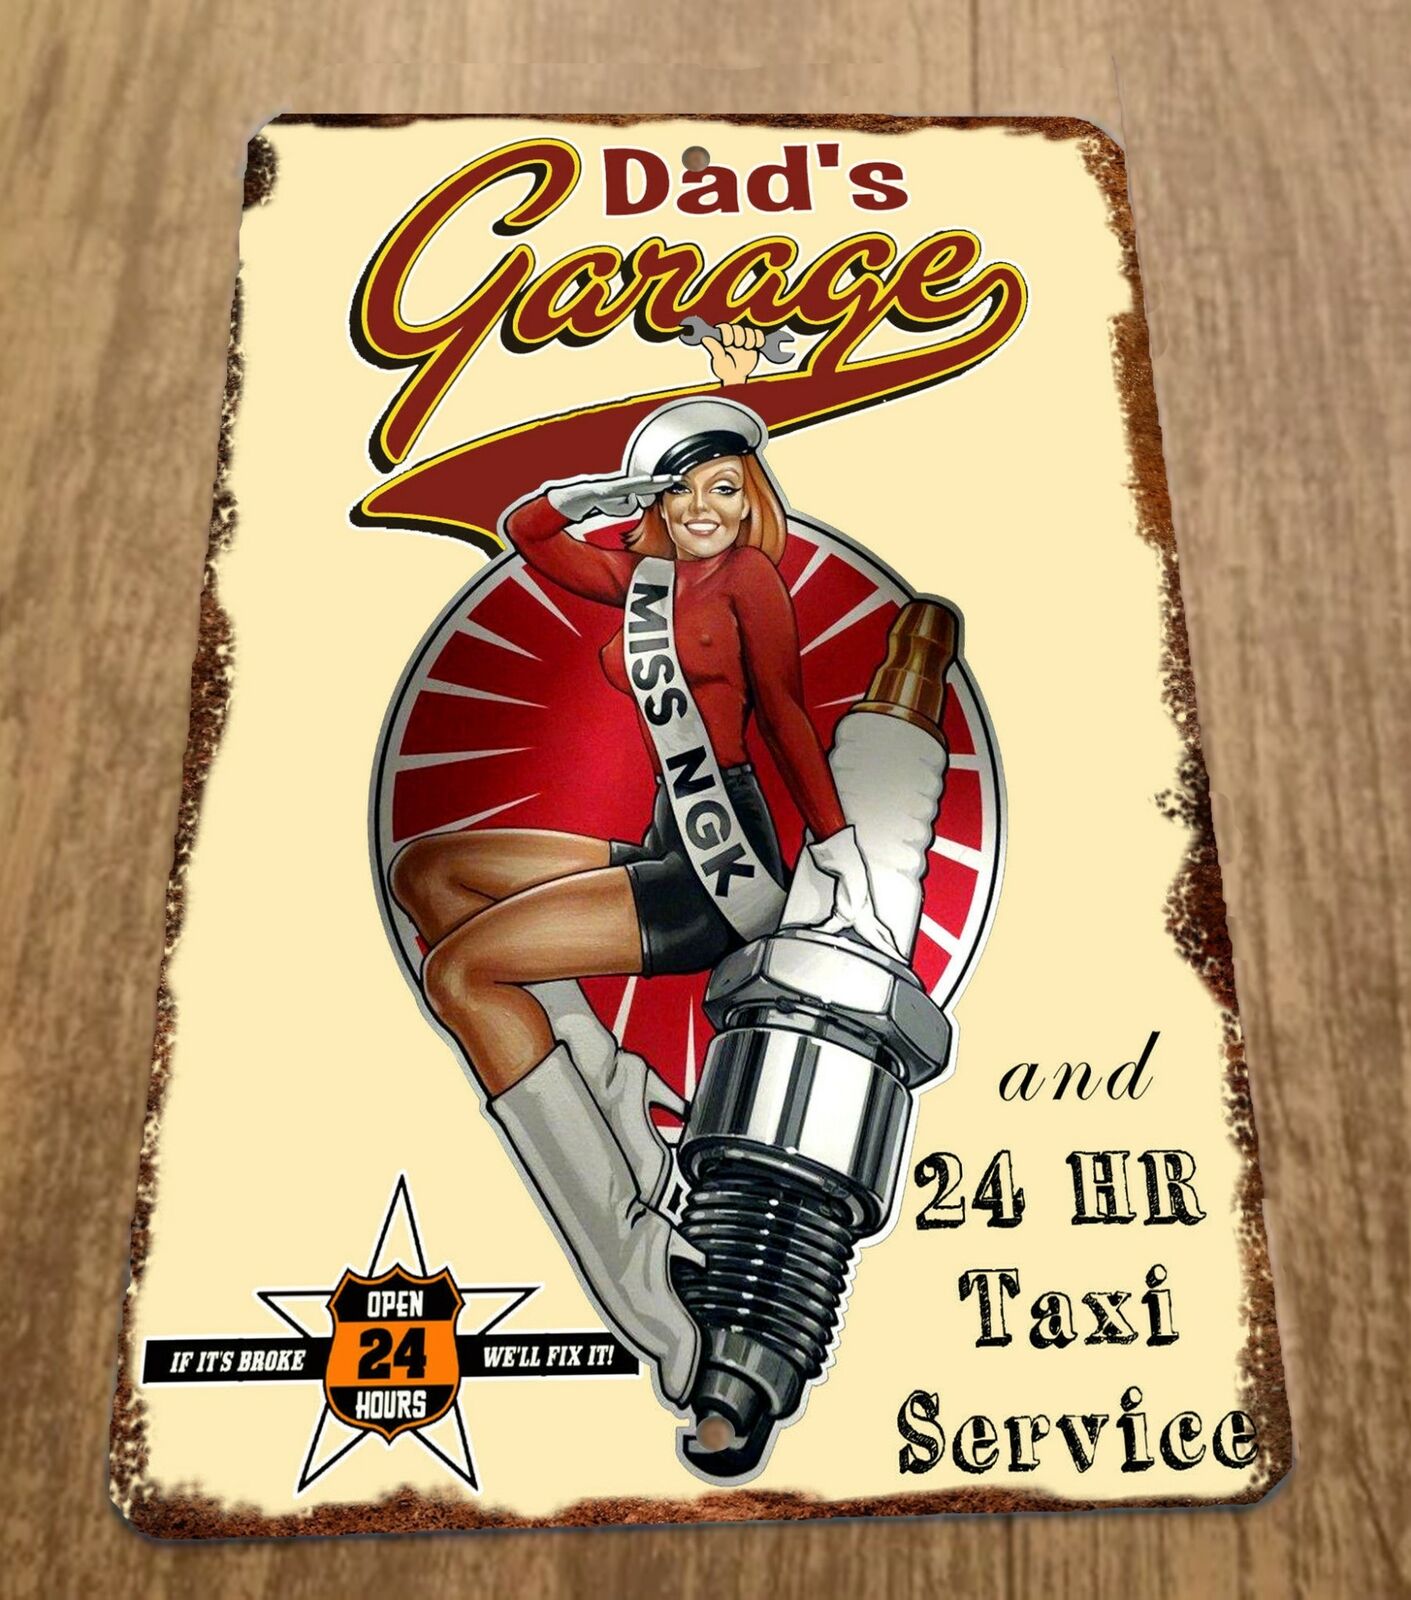 Dads Garage and 24 Hour Taxi Service 8x12 Metal Wall Sign Garage Poster